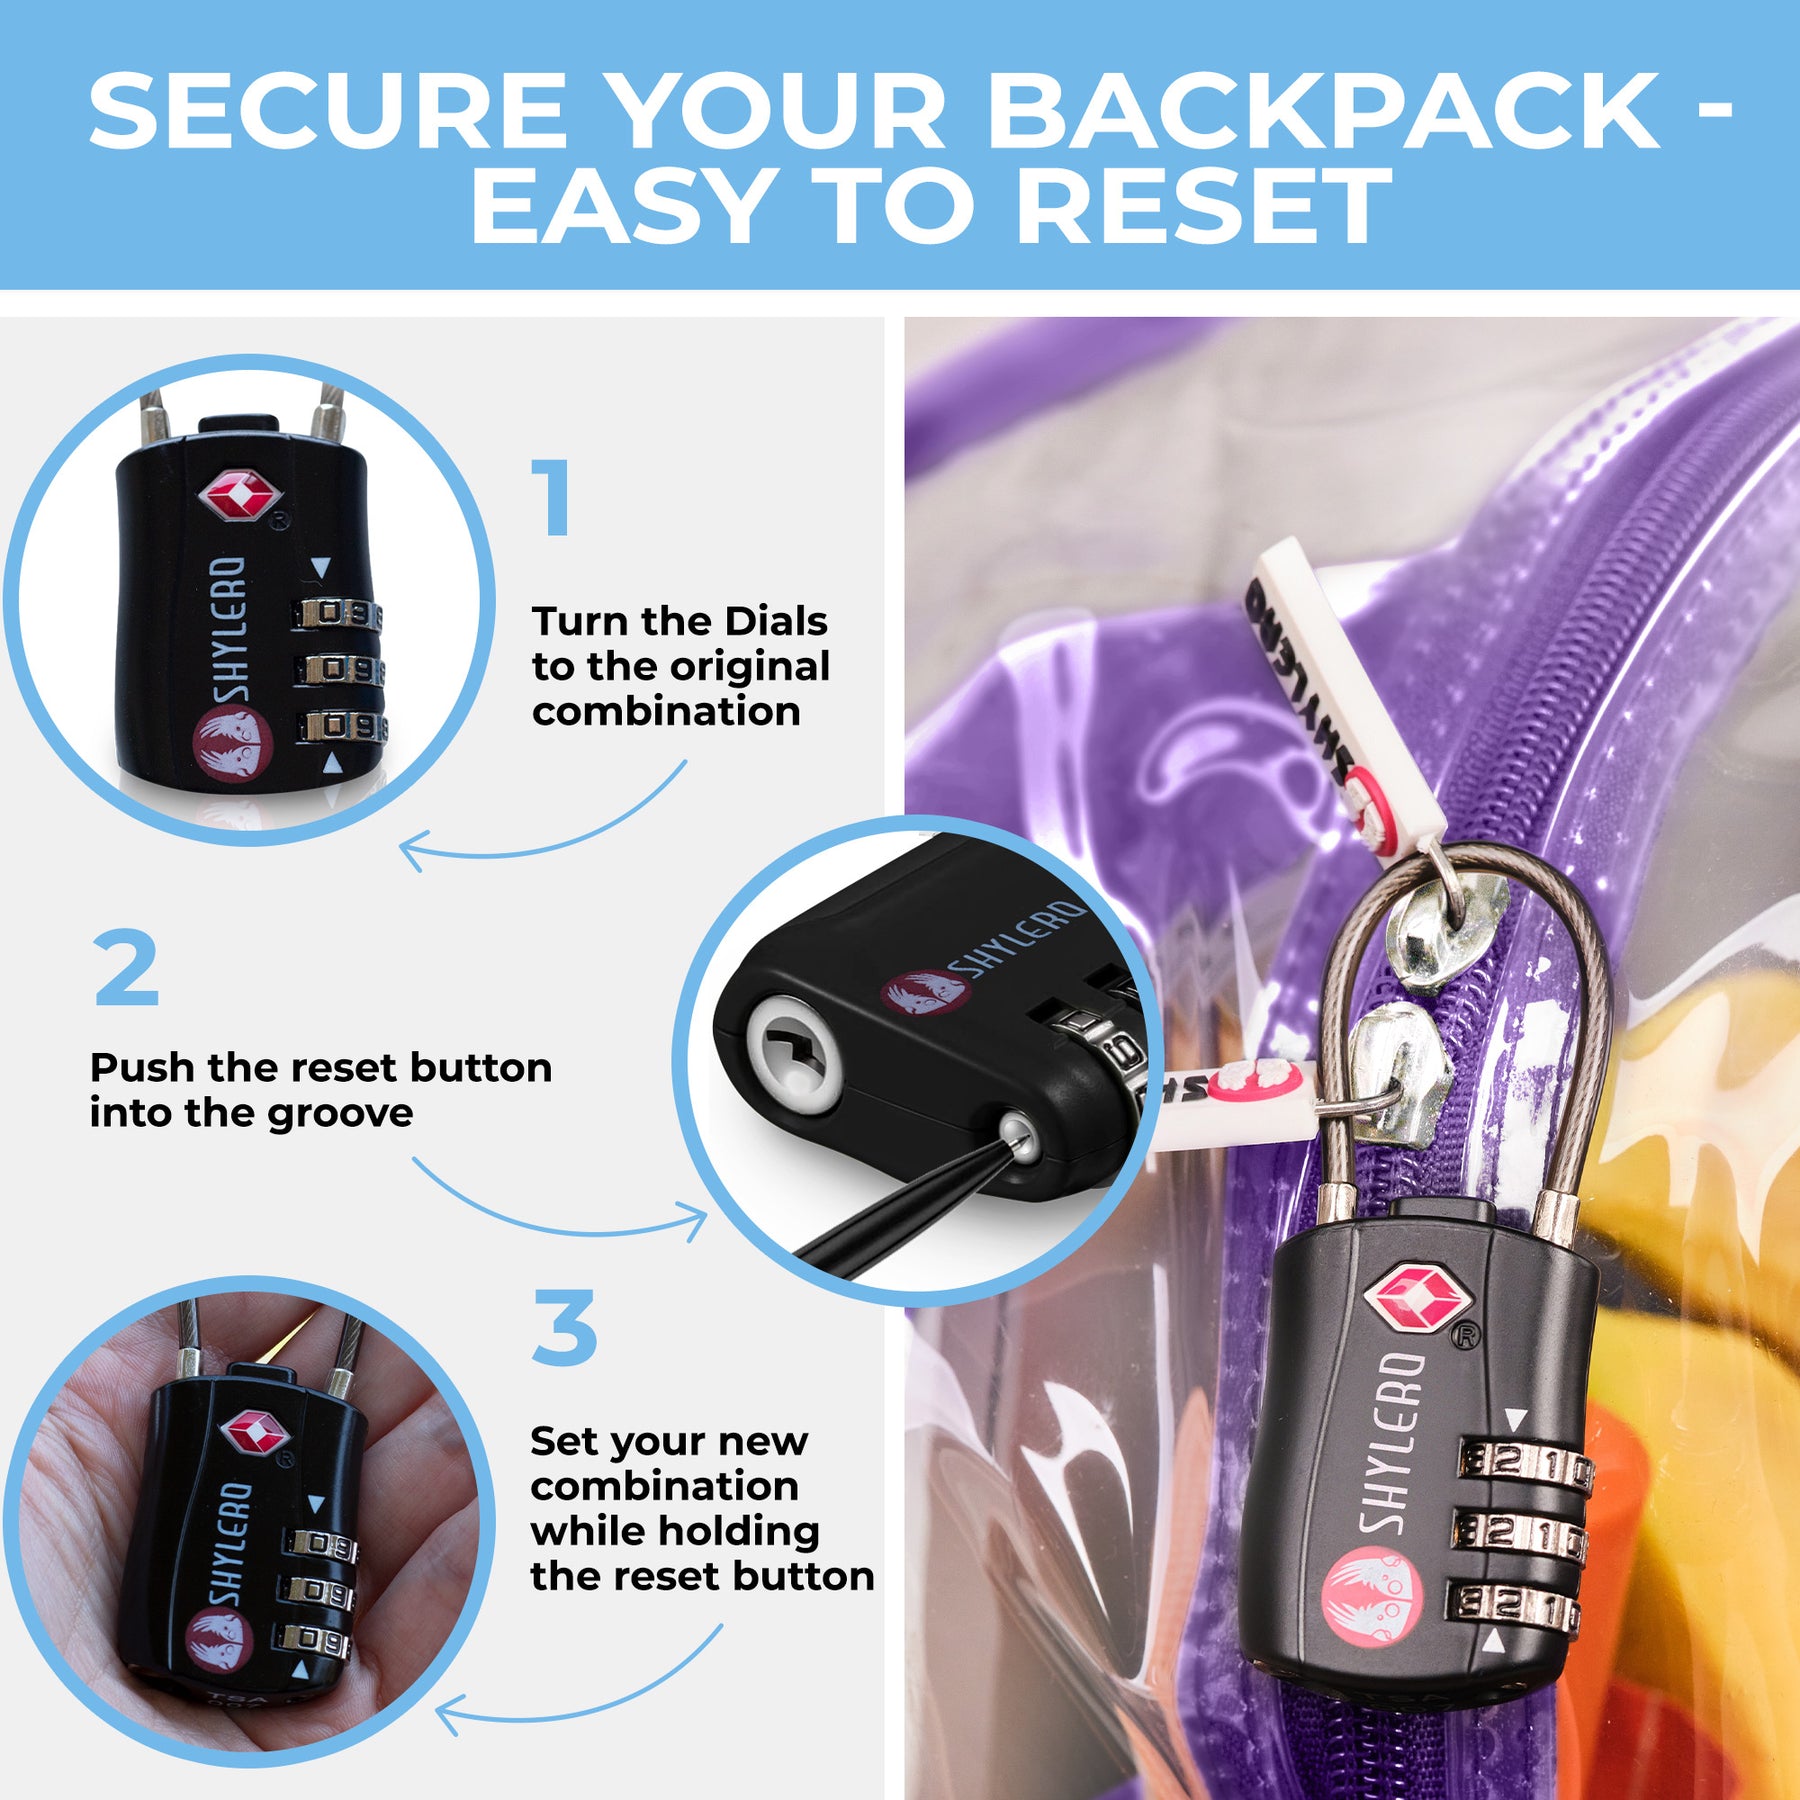 Clear Backpack For Work and School Backpack XL | TSA Lock | H18" x W14" x D8" (45cm x 35cm x 20cm) | 31.5 L |  Purple Rhino